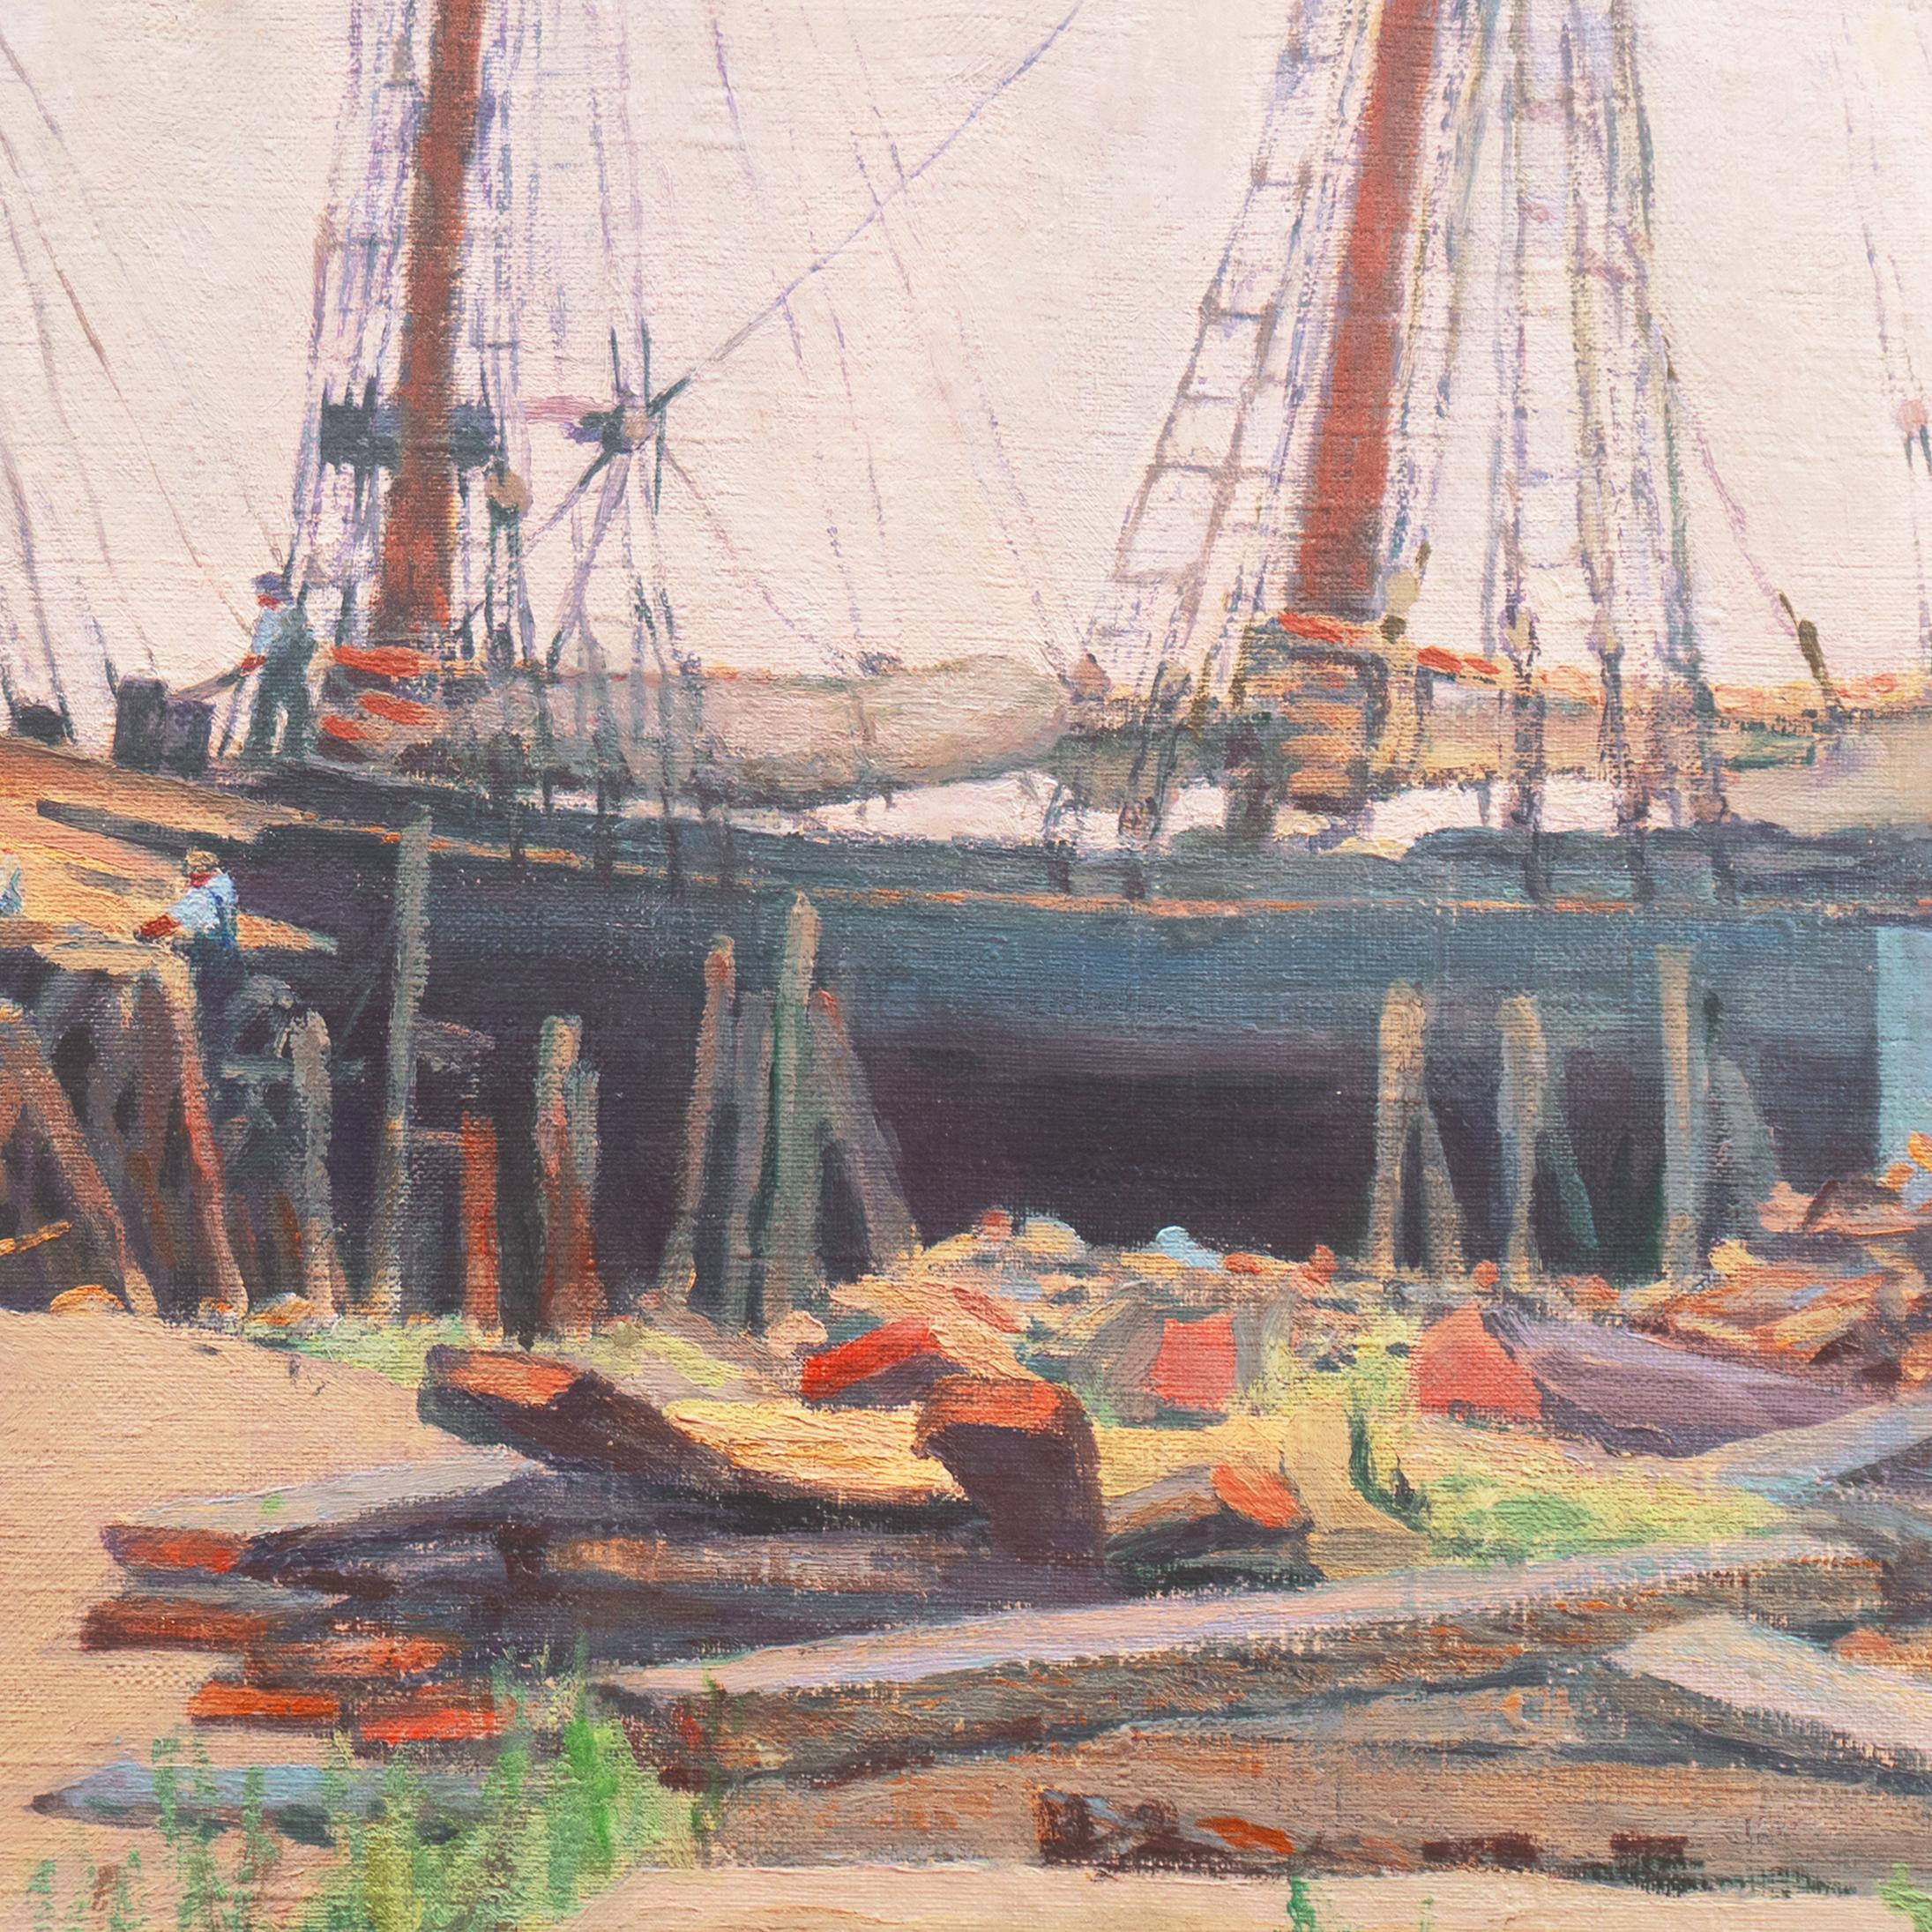 An early twentieth-century, American School oil study of a two-masted, clinker-built schooner undergoing repair in dry dock. Unsigned and painted circa 1925.

